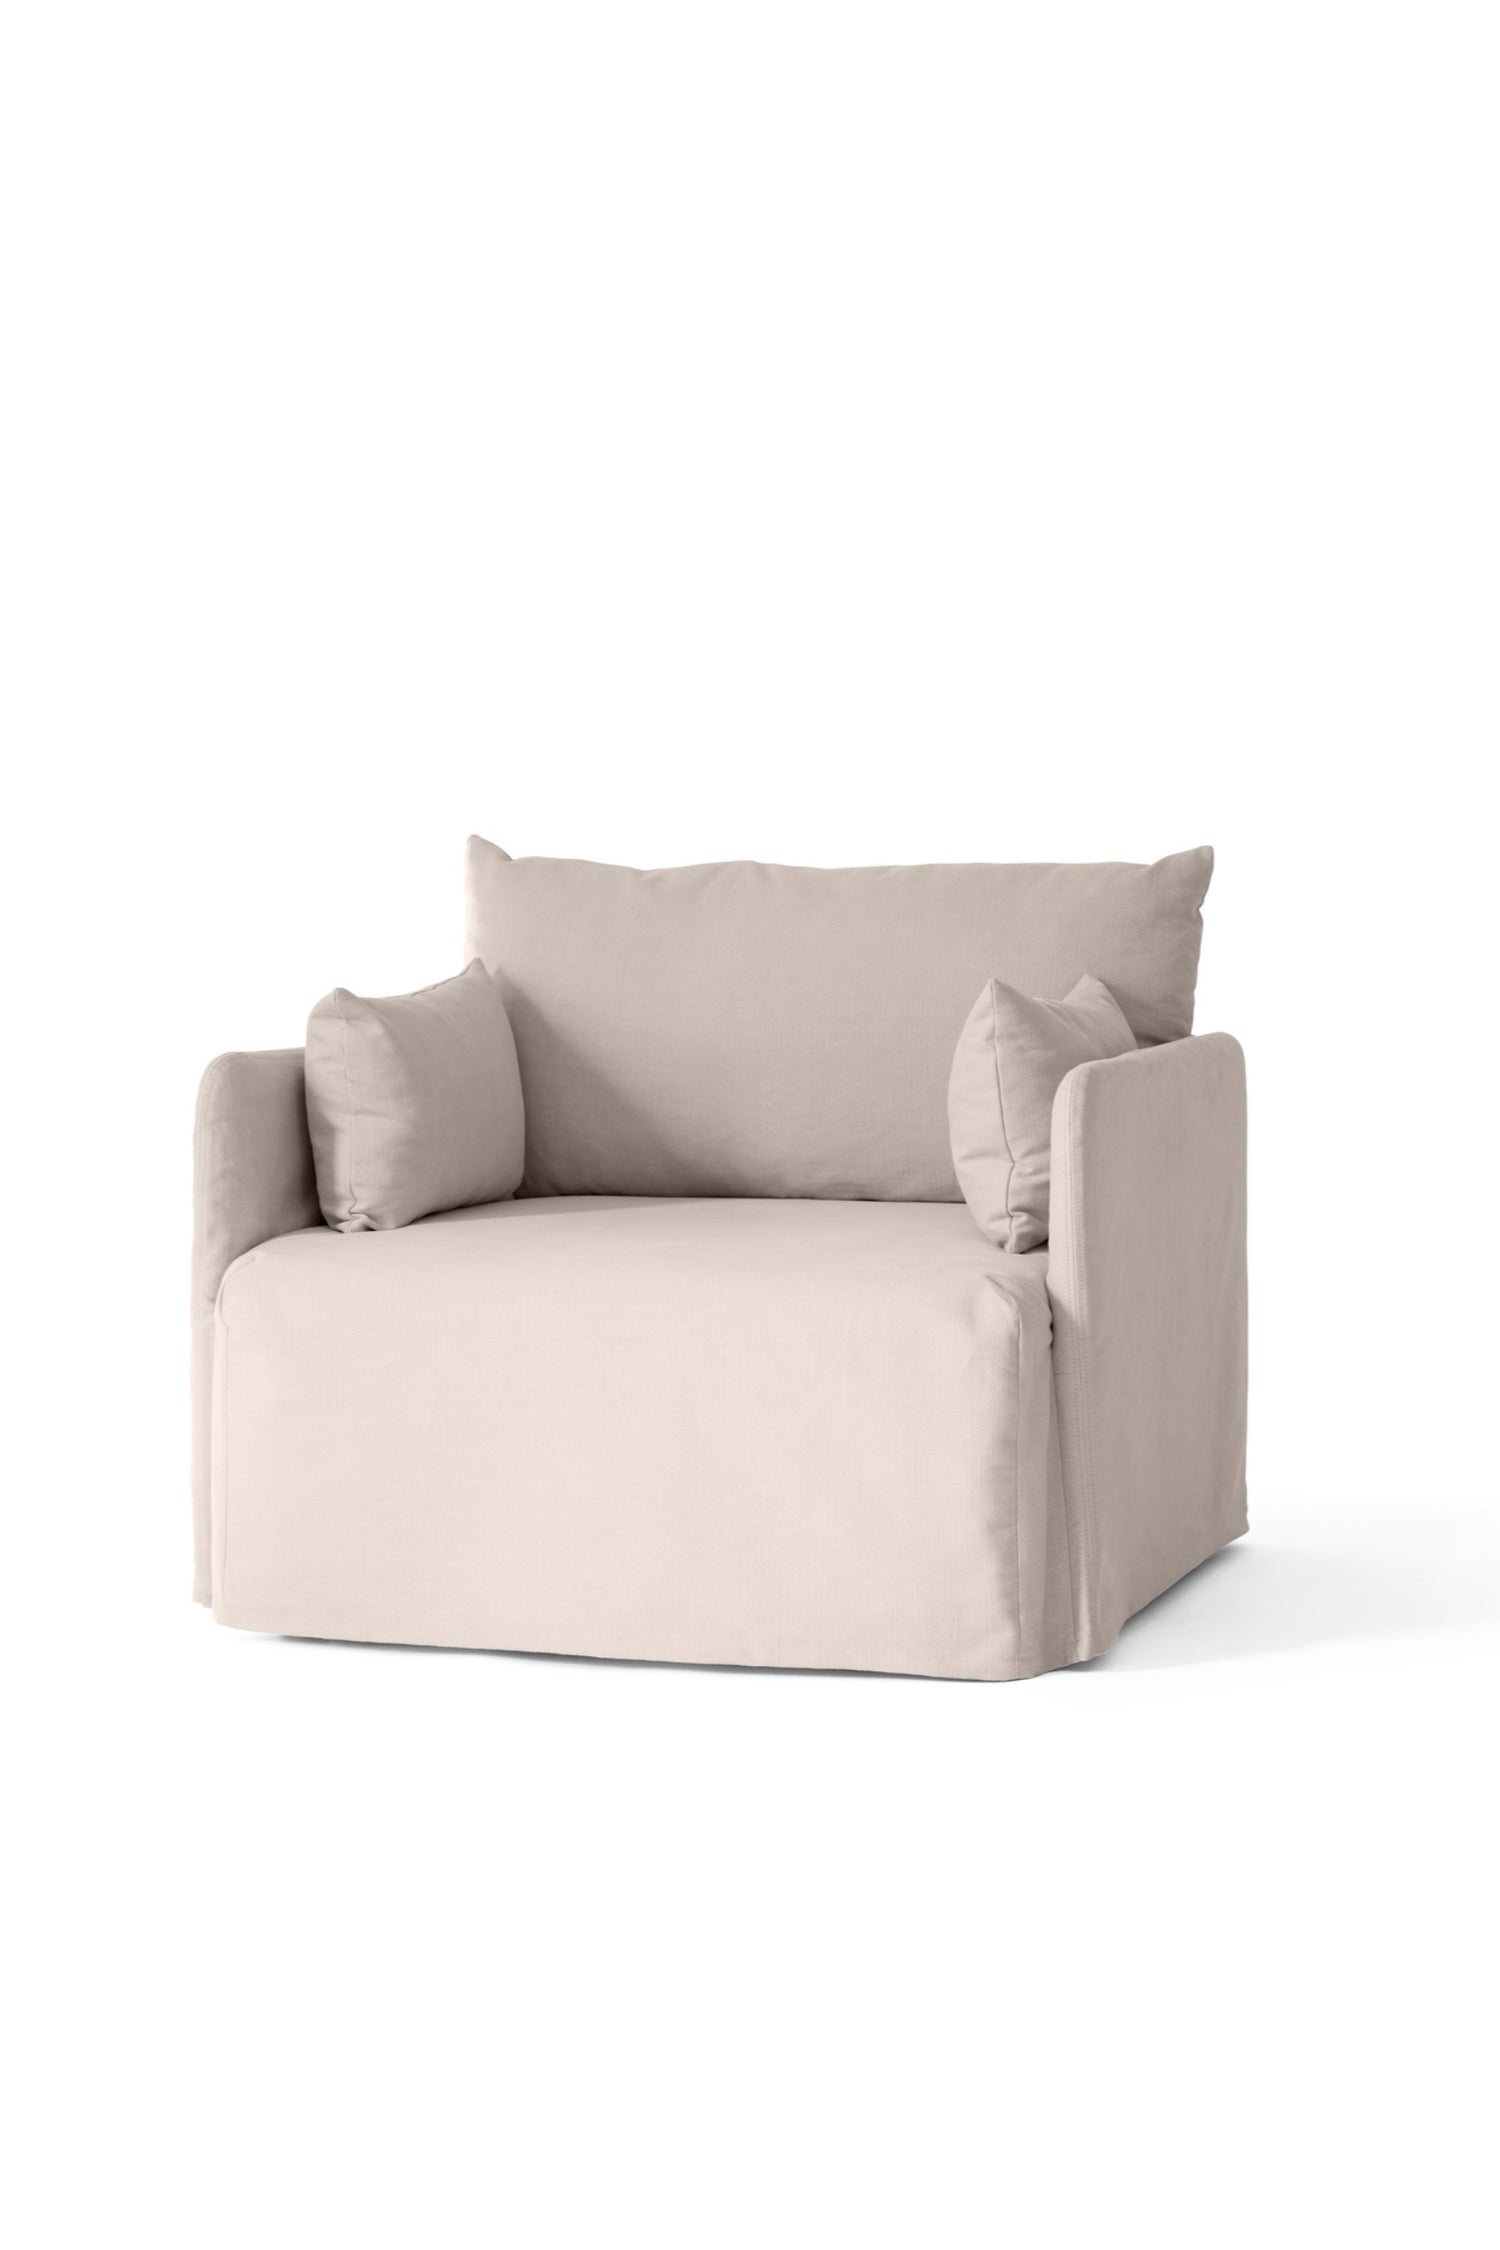 Offset Sofa Chair with Loose Cover 1-seater by Menu.